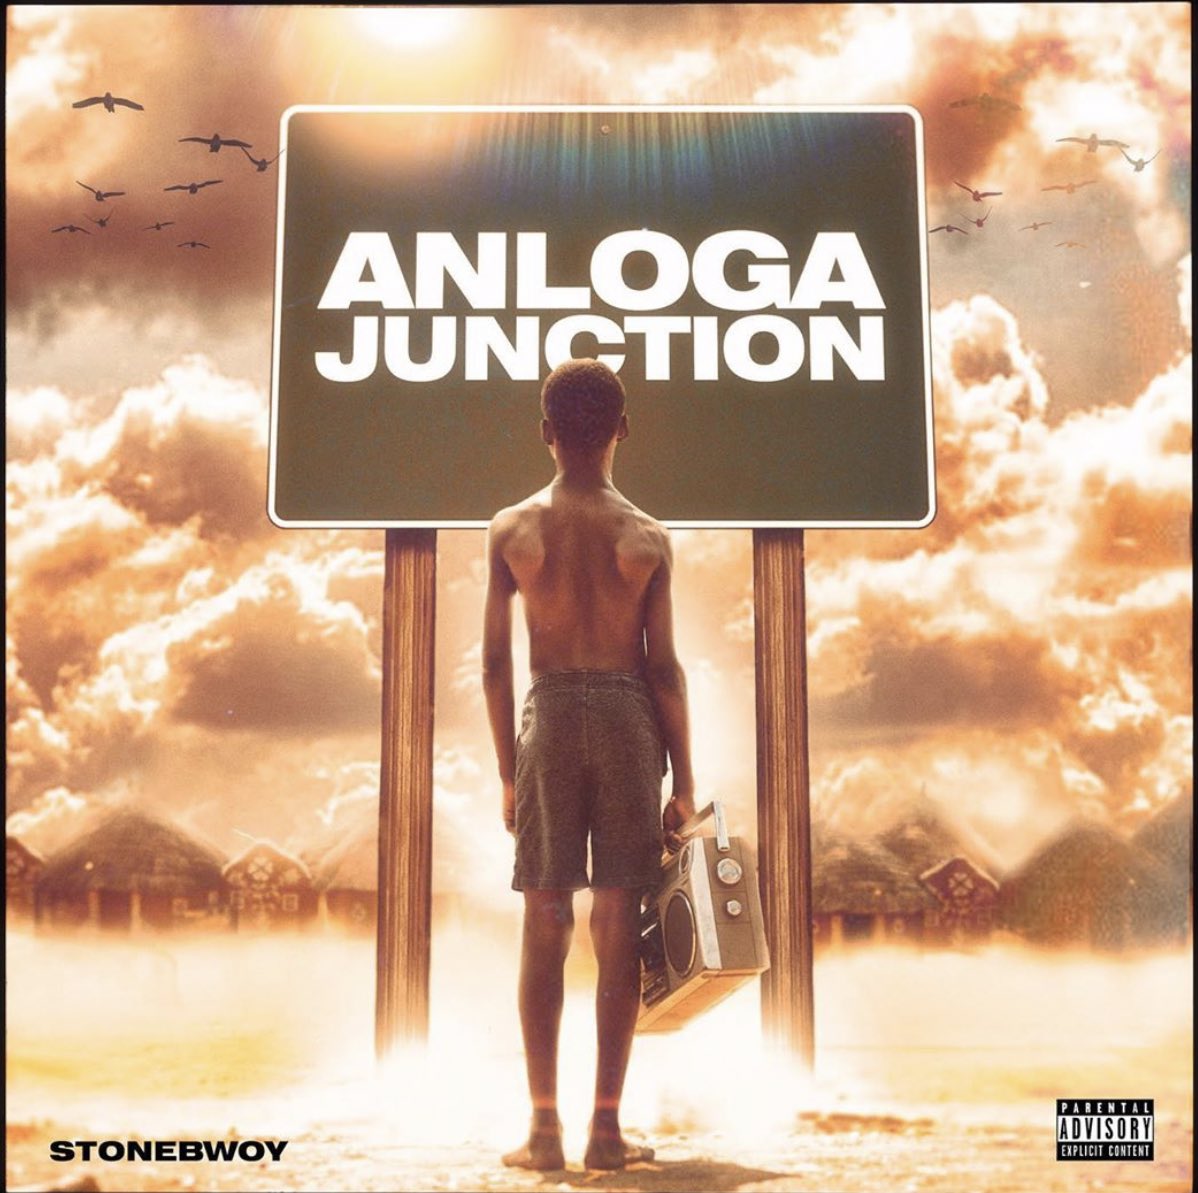 It’s Officially Official, The World 🌏🌍🌎 Will Know... @stonebwoyb #AnlogaJunction Album Out On 24th Of April... #GoodMorning It’s An #AfricanParty So #Understand... Pre-Order Now!!! 💯🔥🌊🐊🐲🐉💨🔋🌎🌏🌍⭐️💫🌙🌟✨⚡️💥